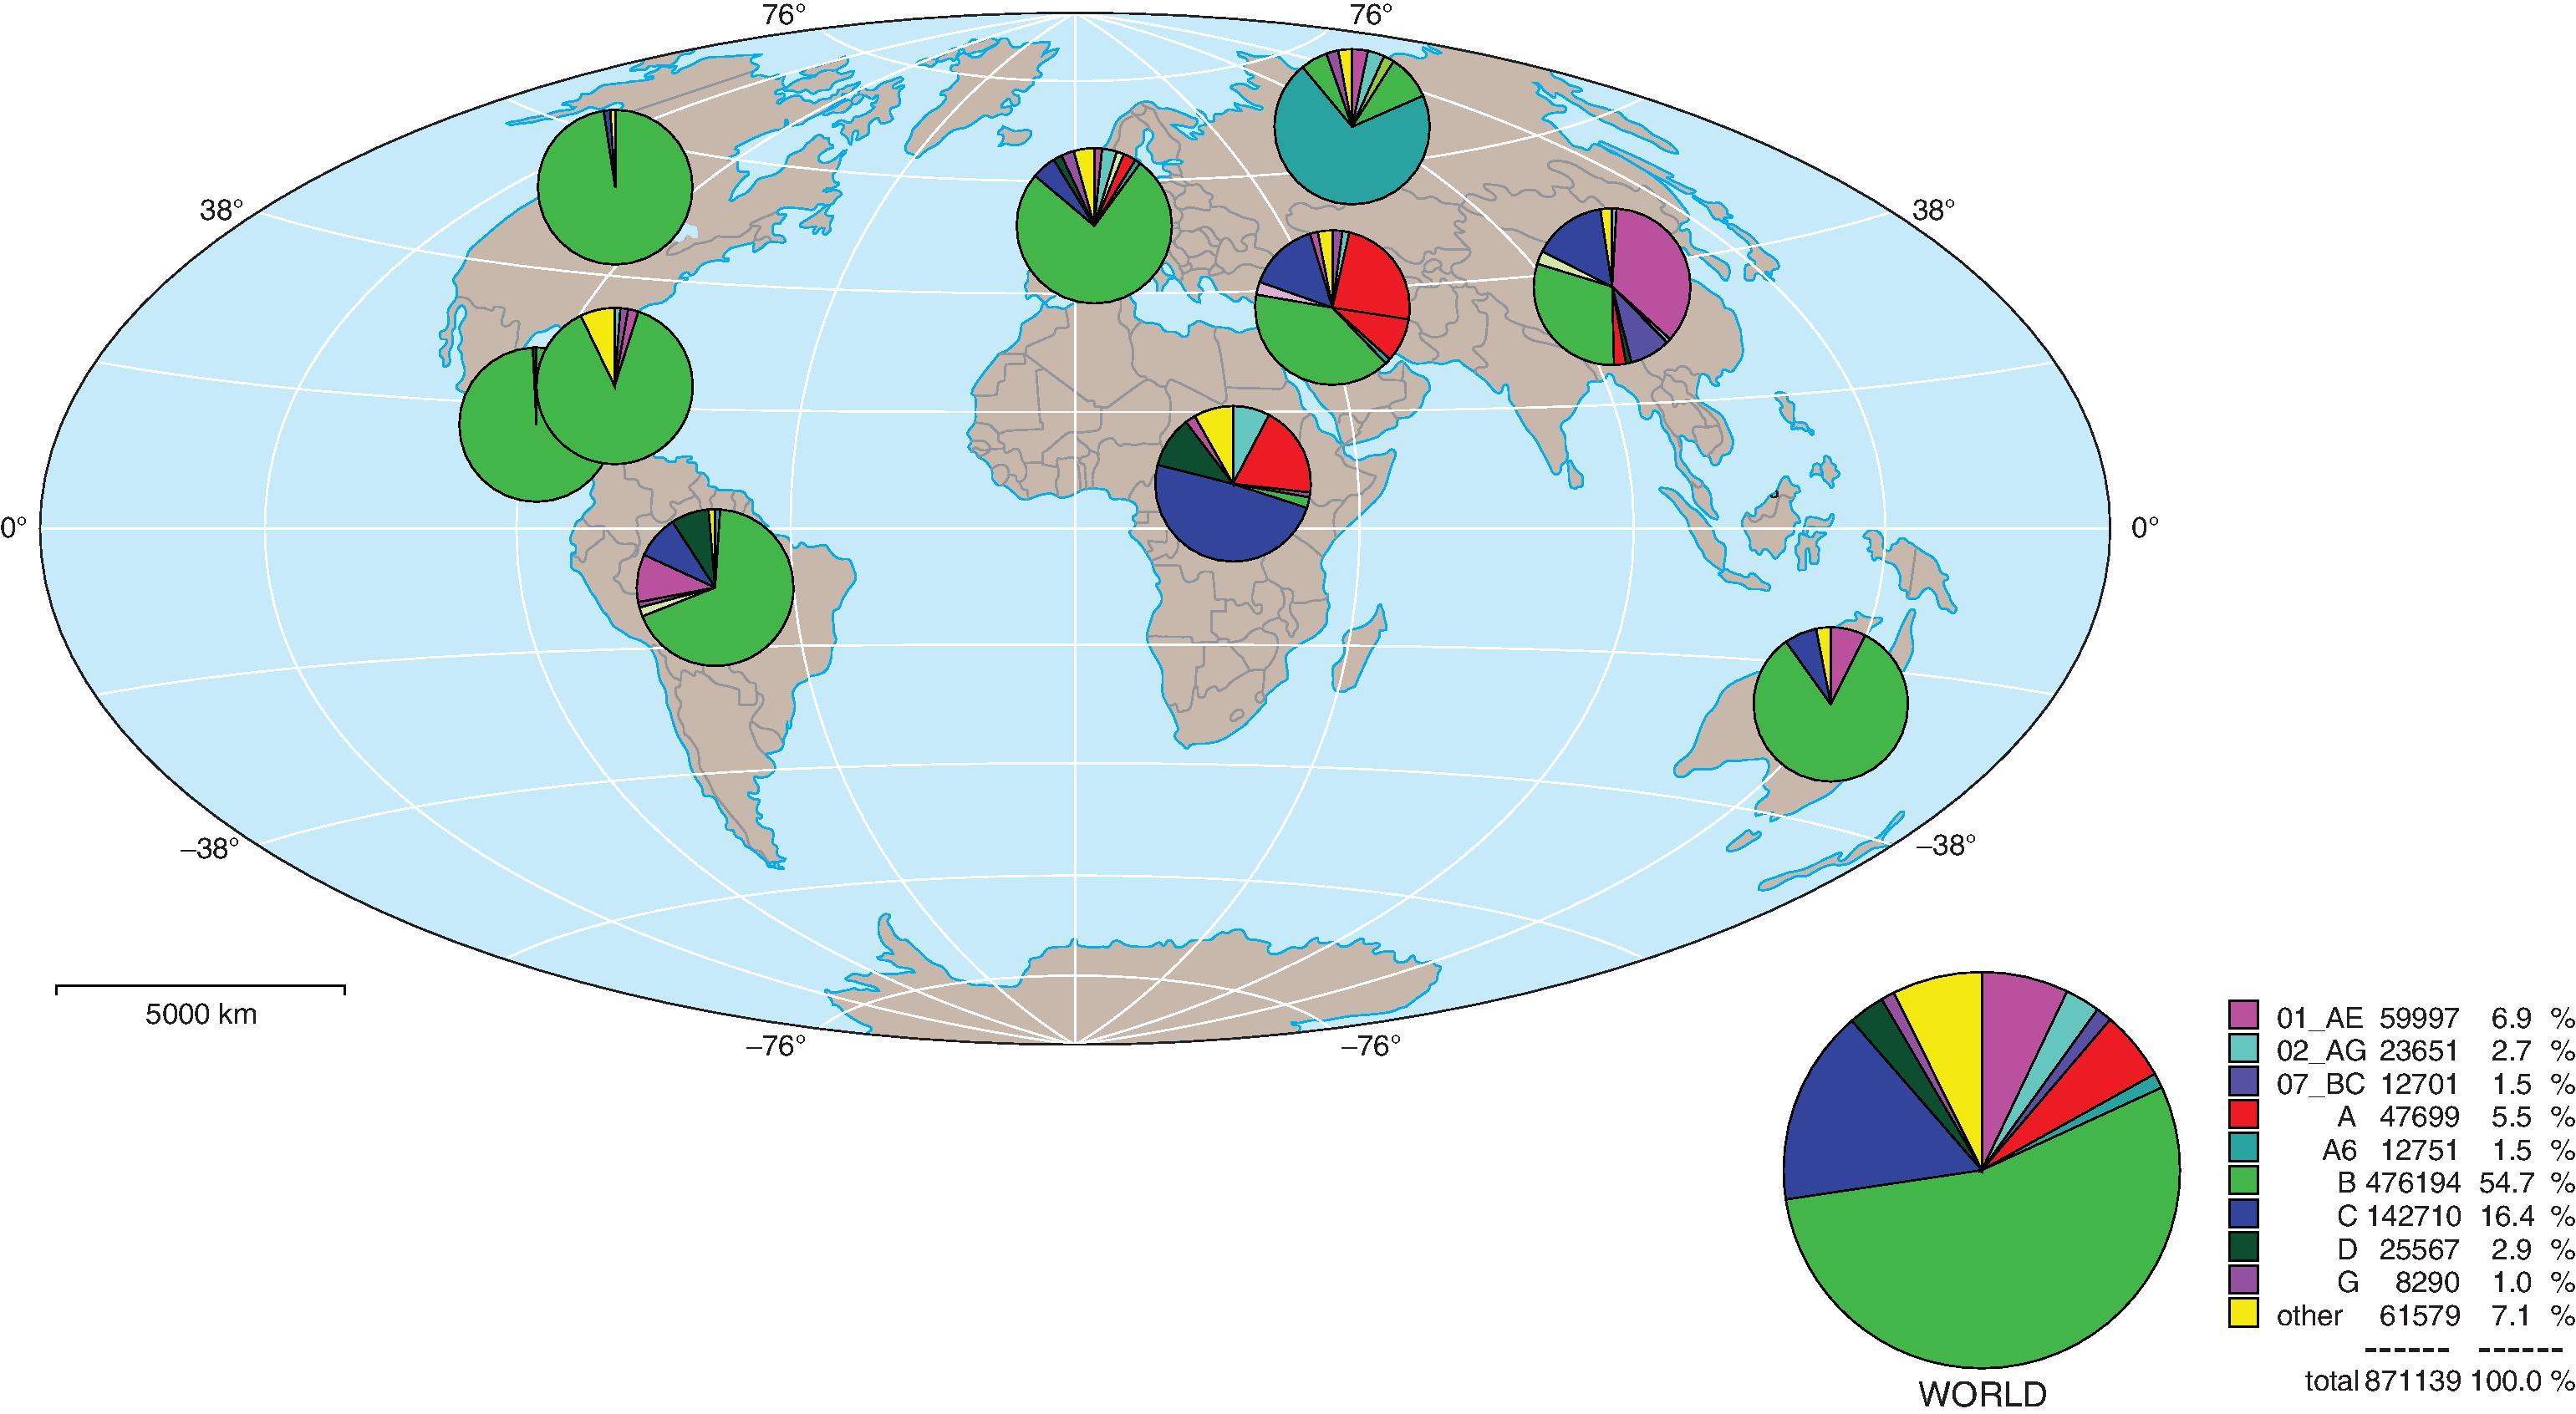 Fig. 31.3, Global distribution of HIV-1 variants, 2021. While HIV-1 clade B is the most common variant in the United States, Europe and globally, clade C is most common in South Africa. However, HIV-1 continues to rapidly evolve making targeting the most conserved CD8 and CD4 T-cell epitopes and B cell neutralizing epitopes a central goal of HIV-1 vaccine development. (Material provided courtesy of Los Alamos National Laboratory.)